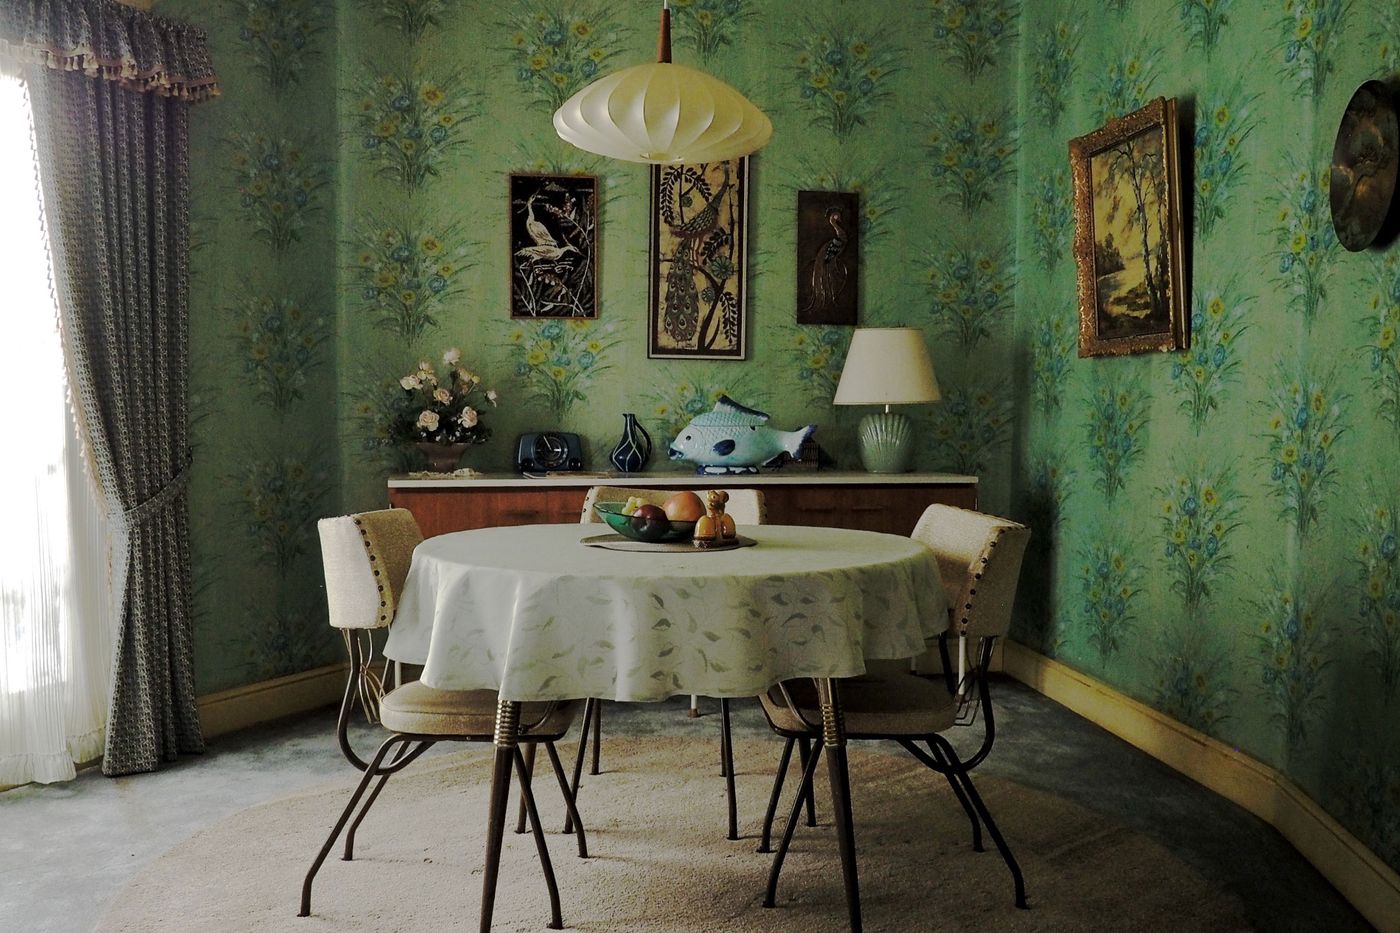 Plaid wallpaper in The Queen's Gambit - Film and Furniture